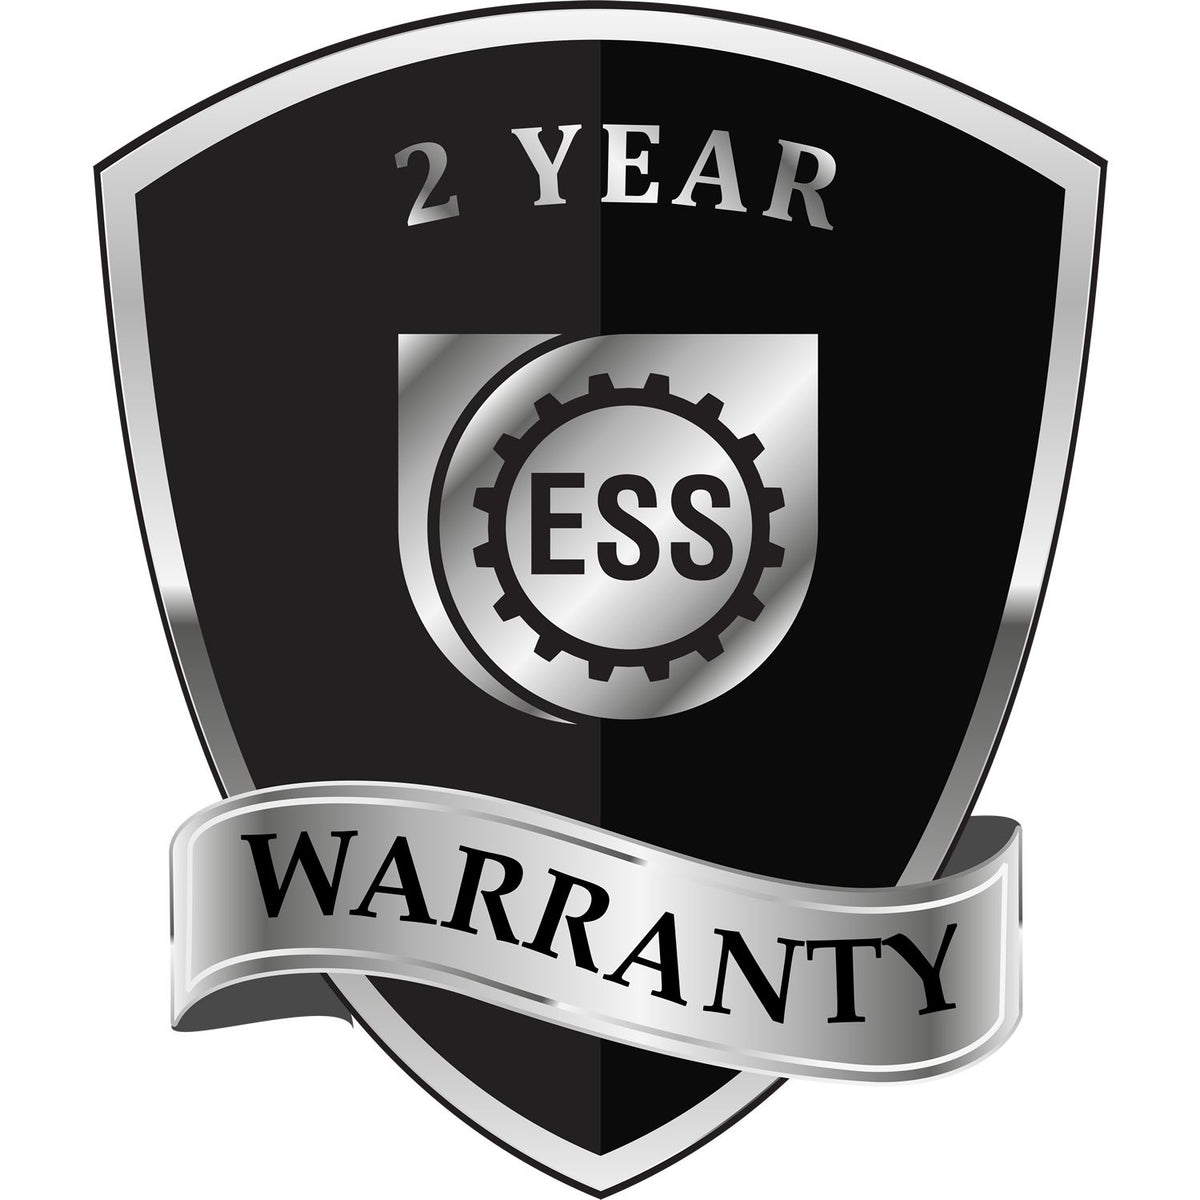 A badge or emblem showing a warranty icon for the Heavy Duty Cast Iron Mississippi Engineer Seal Embosser